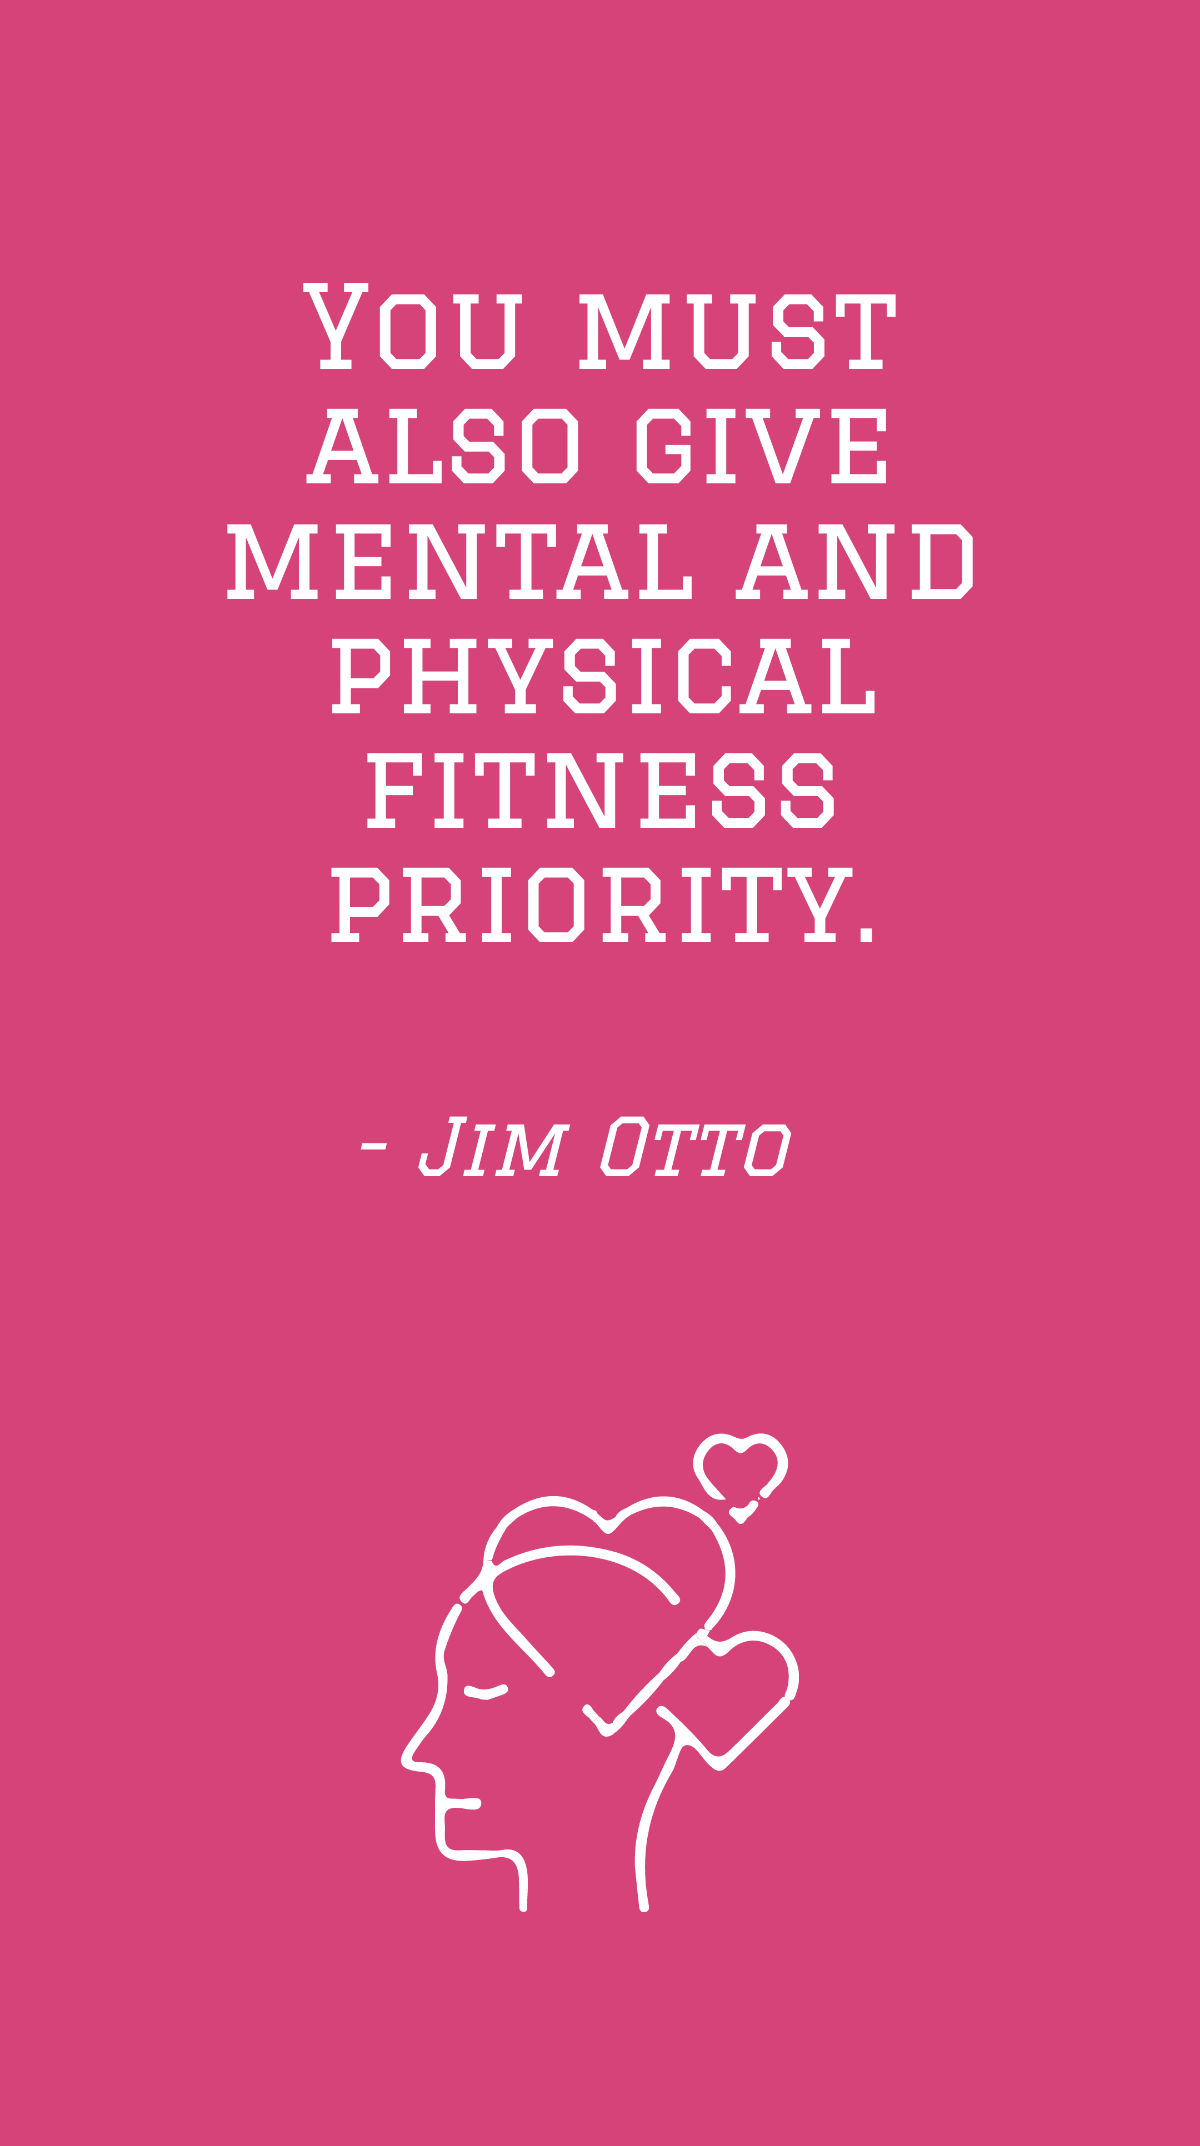 Free Jim Otto - You must also give mental and physical fitness priority. Template